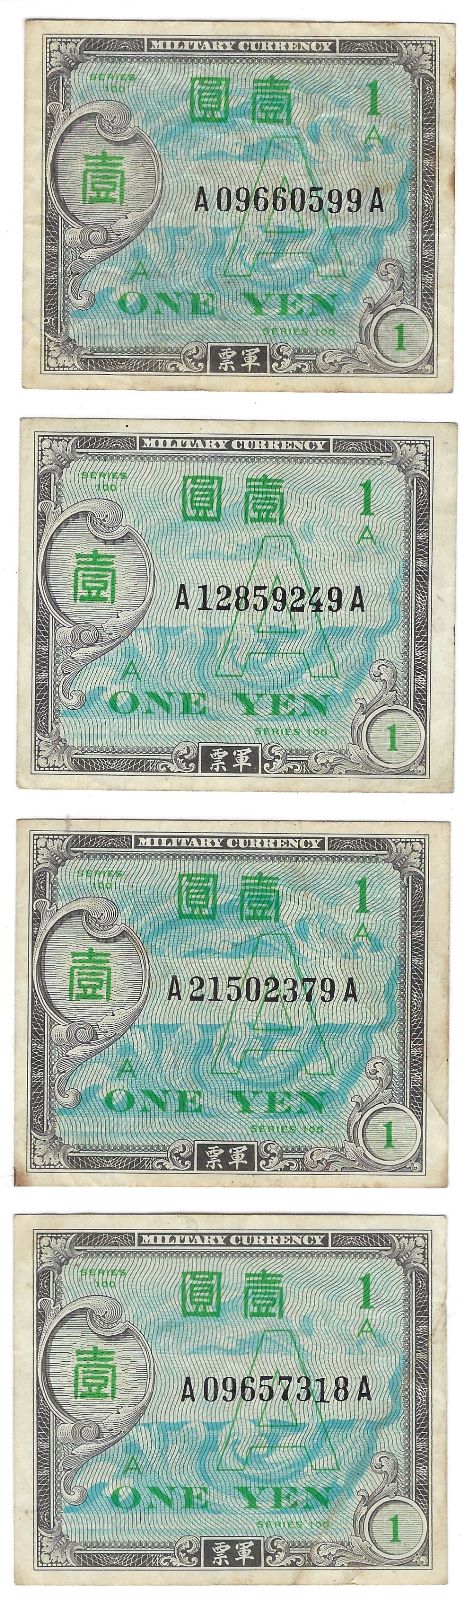 JAPAN - WWII Allied Military Currency 1 Yen x 4 Notes ("A" ) 1945, P-66, Fine-VF. J1a3